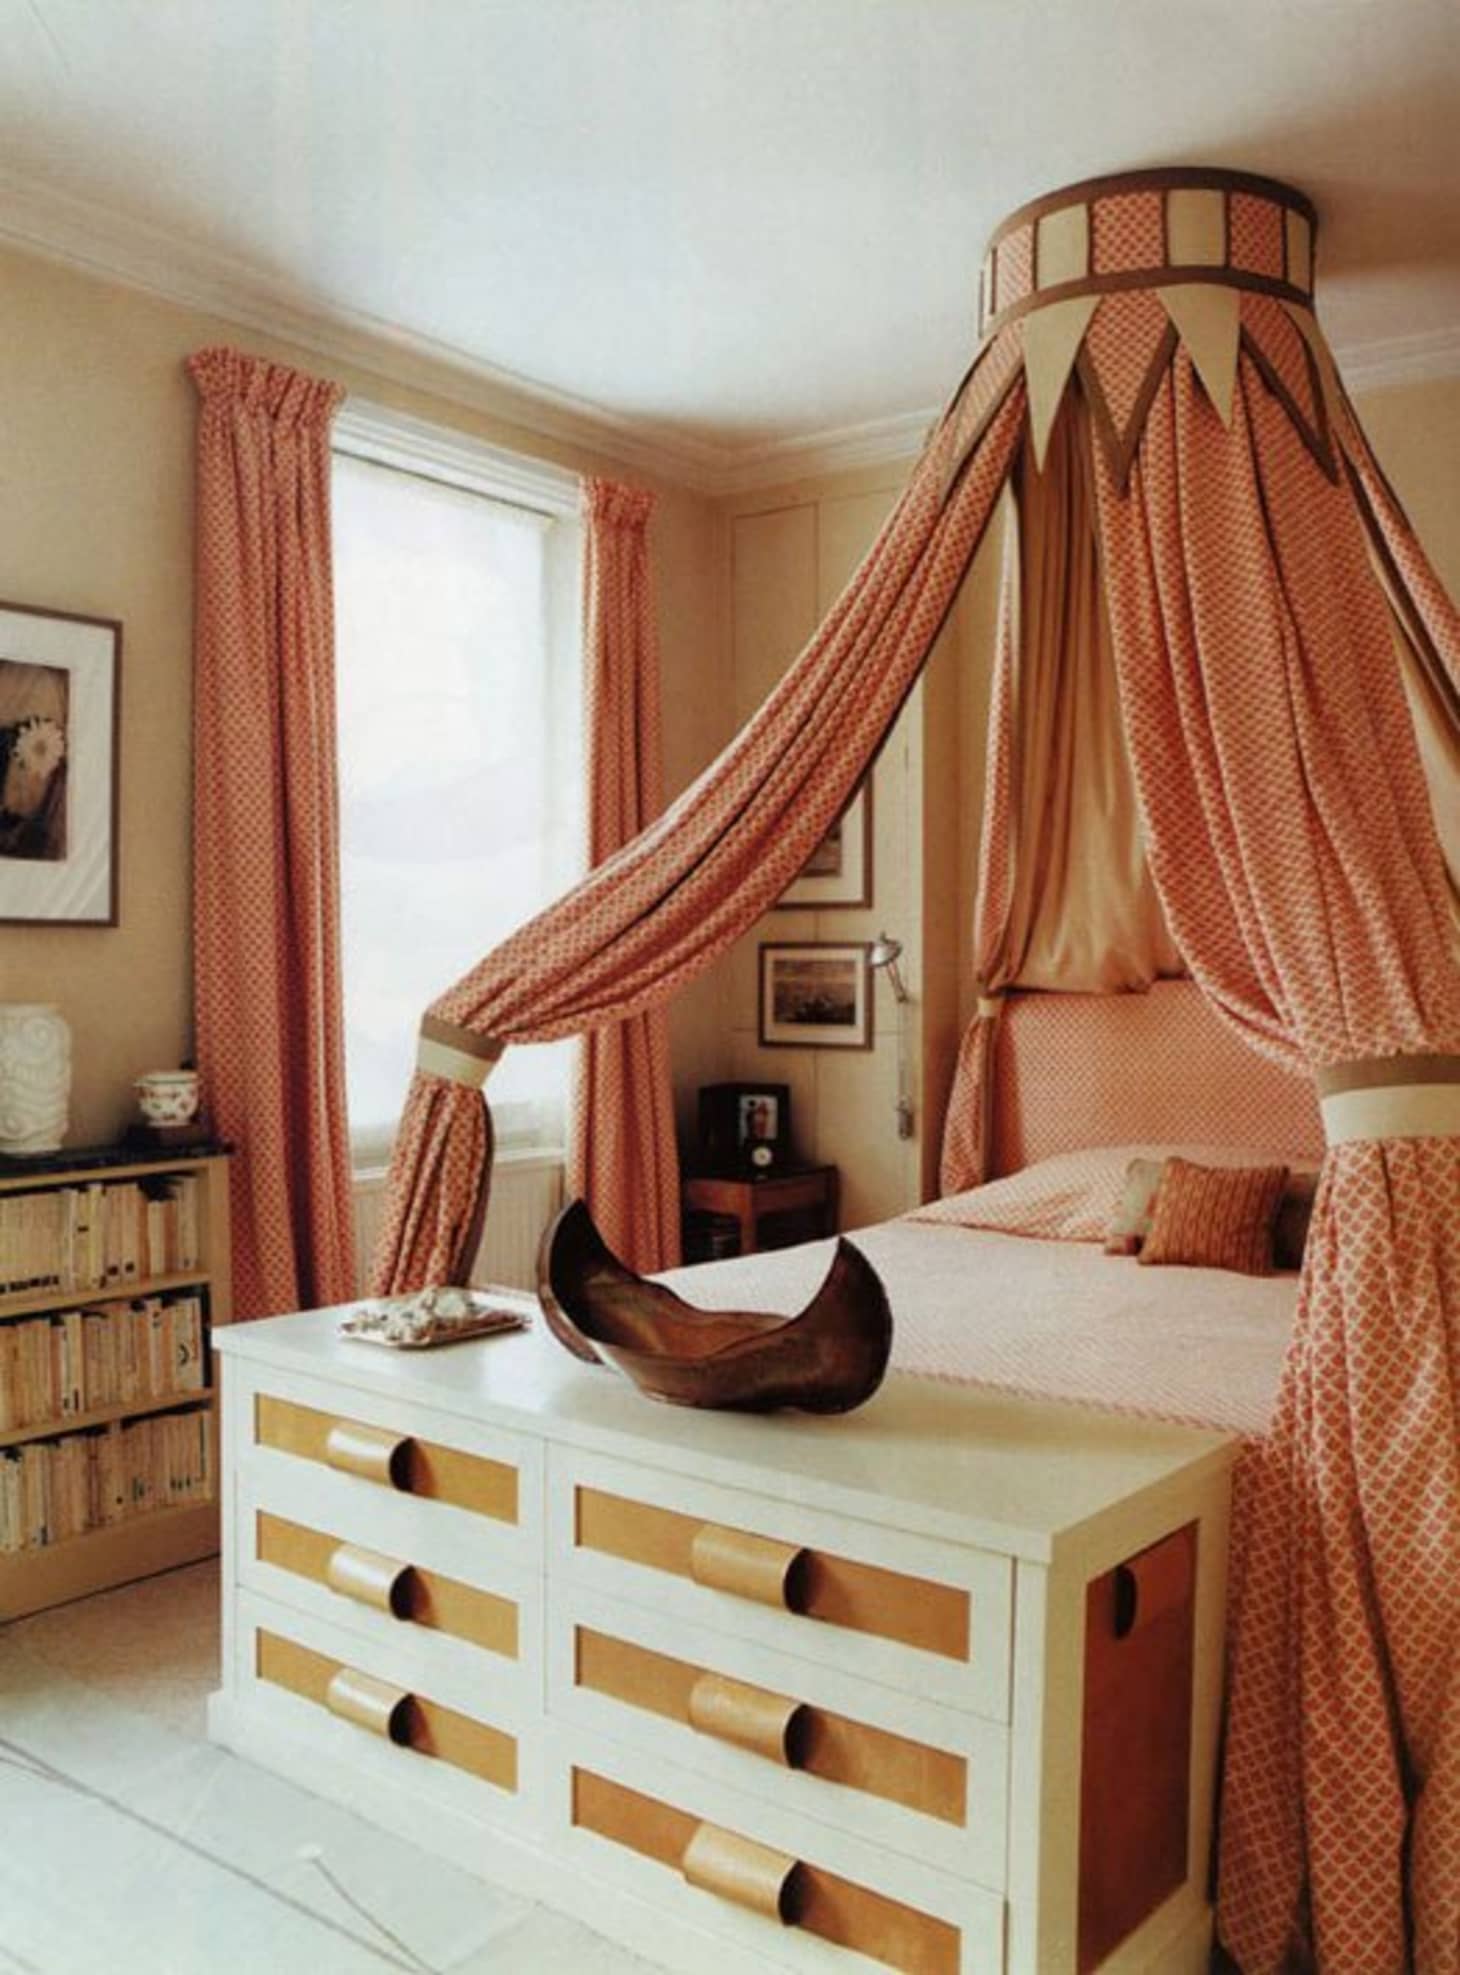 13 Ways To Rethink The Foot Of Your Bed Apartment Therapy